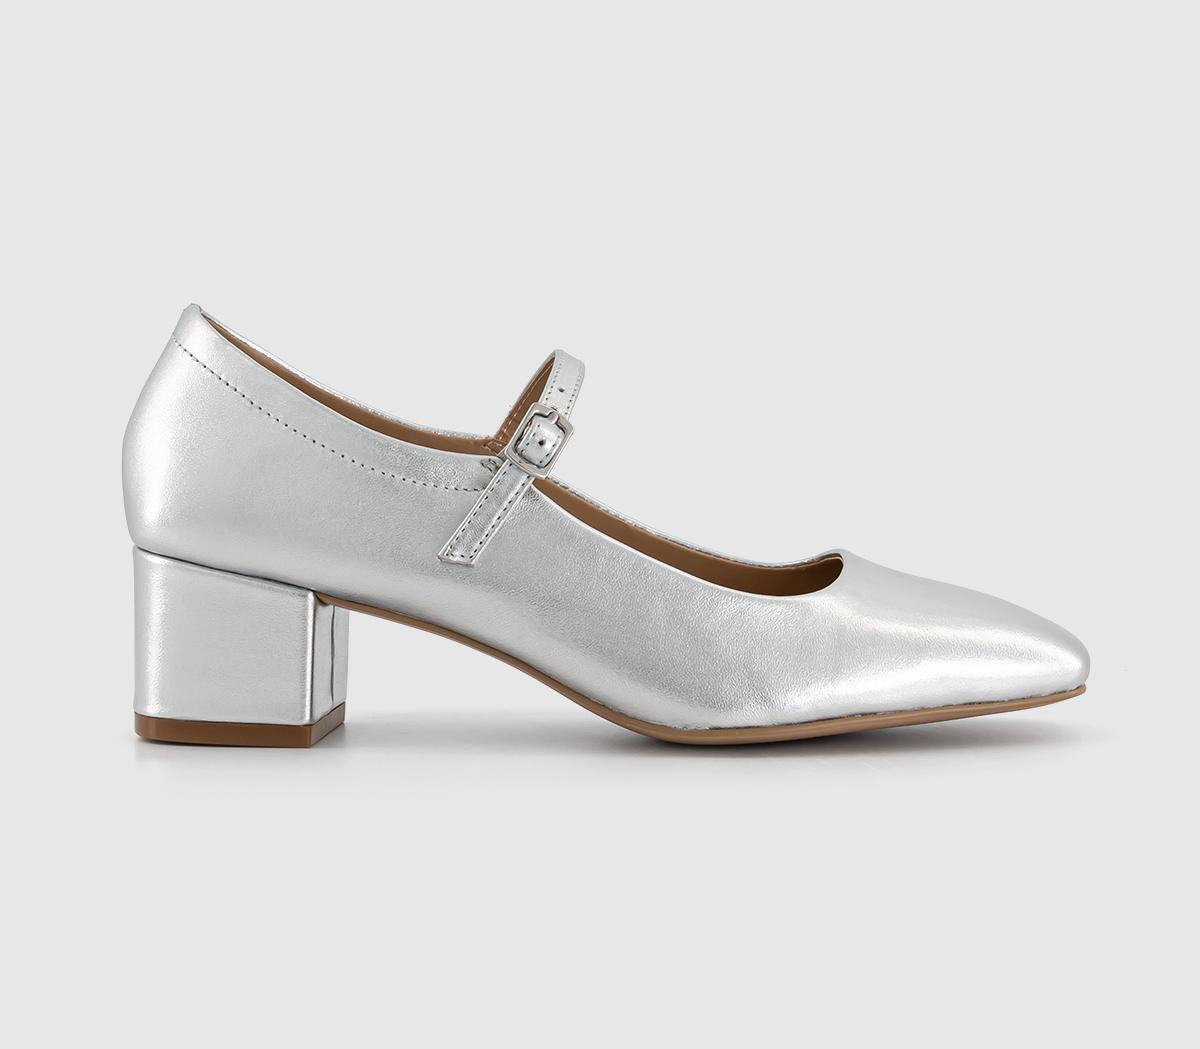 OFFICEMessage Unlined Mary Jane HeelsSilver Leather